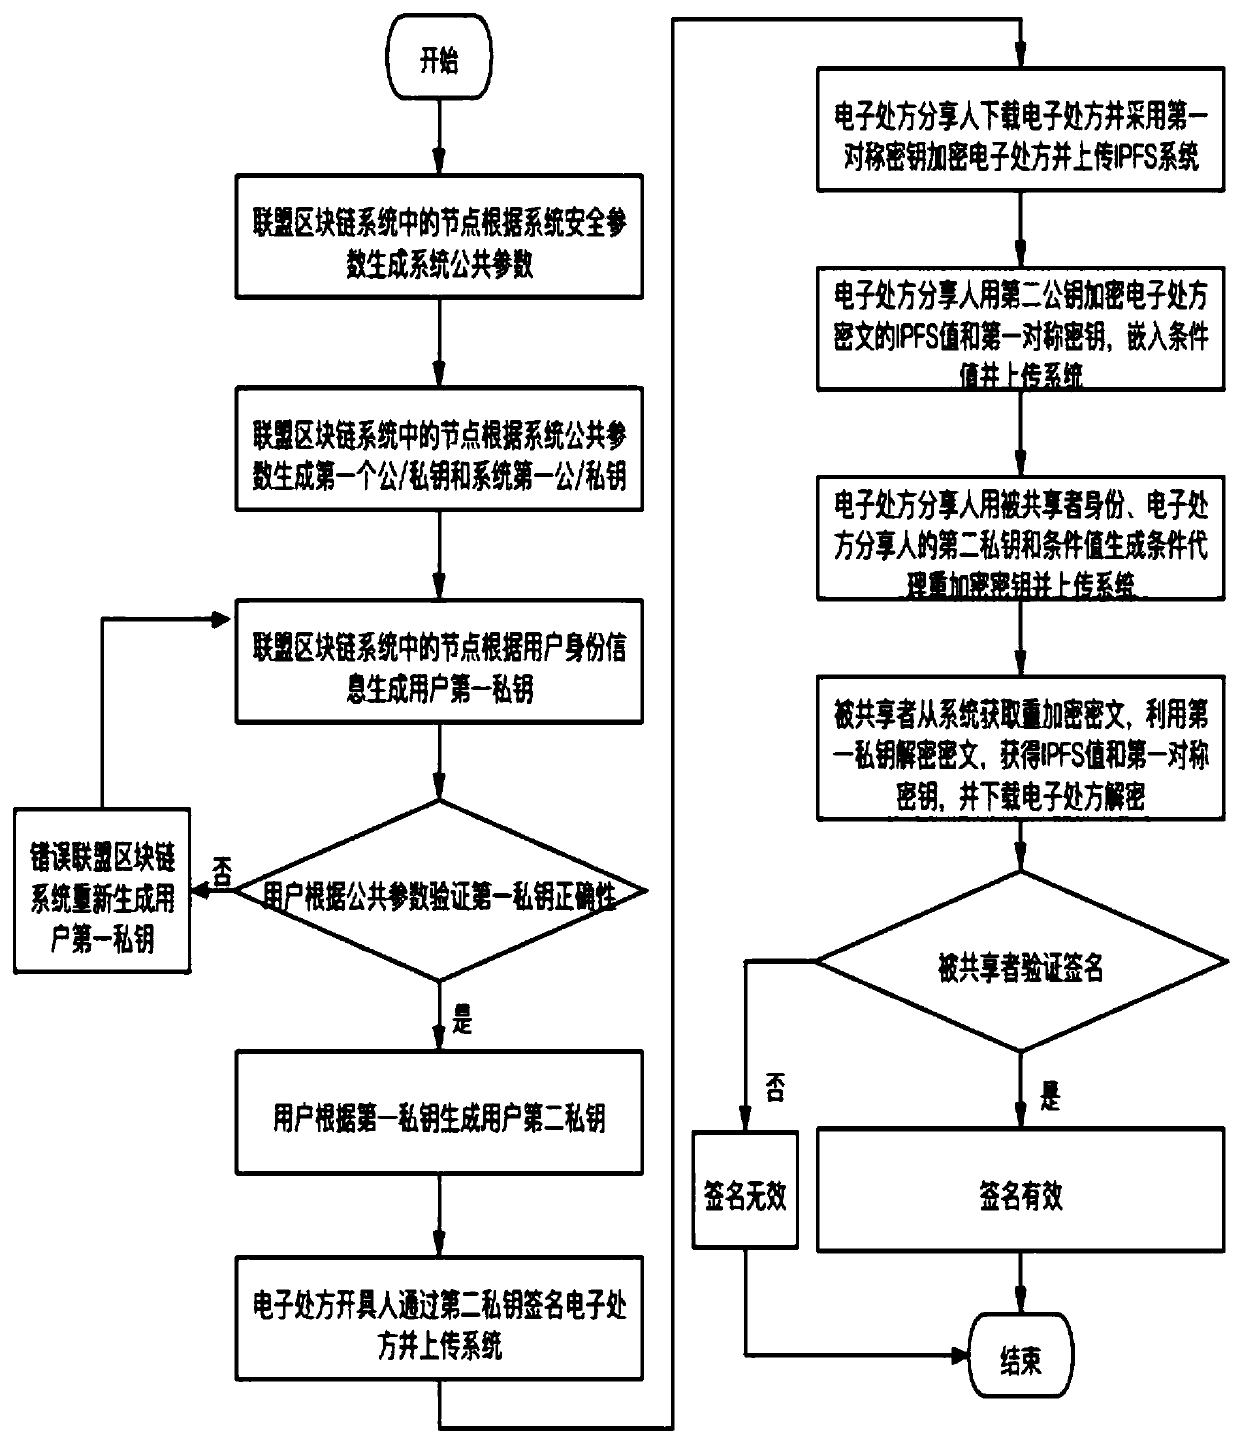 Electronic prescription sharing method based on block chain and conditional agent re-encryption